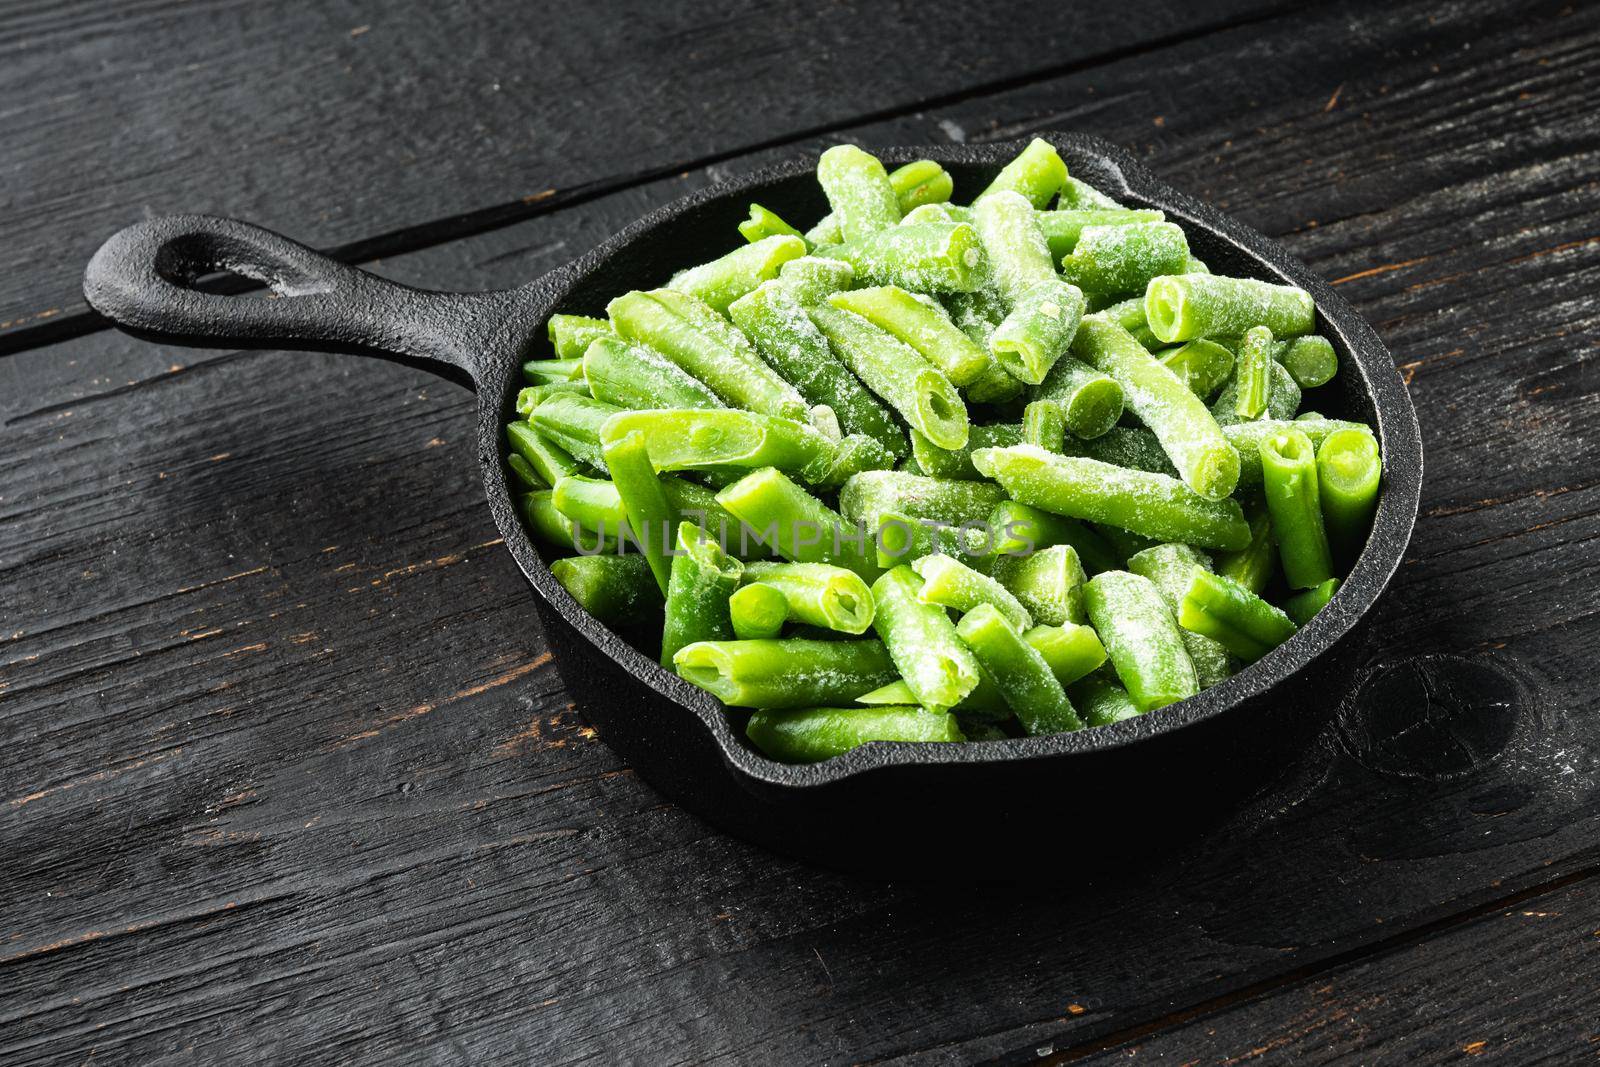 Frozen organic green beans. Healthy food concept set, in frying cast iron pan, on black wooden table background